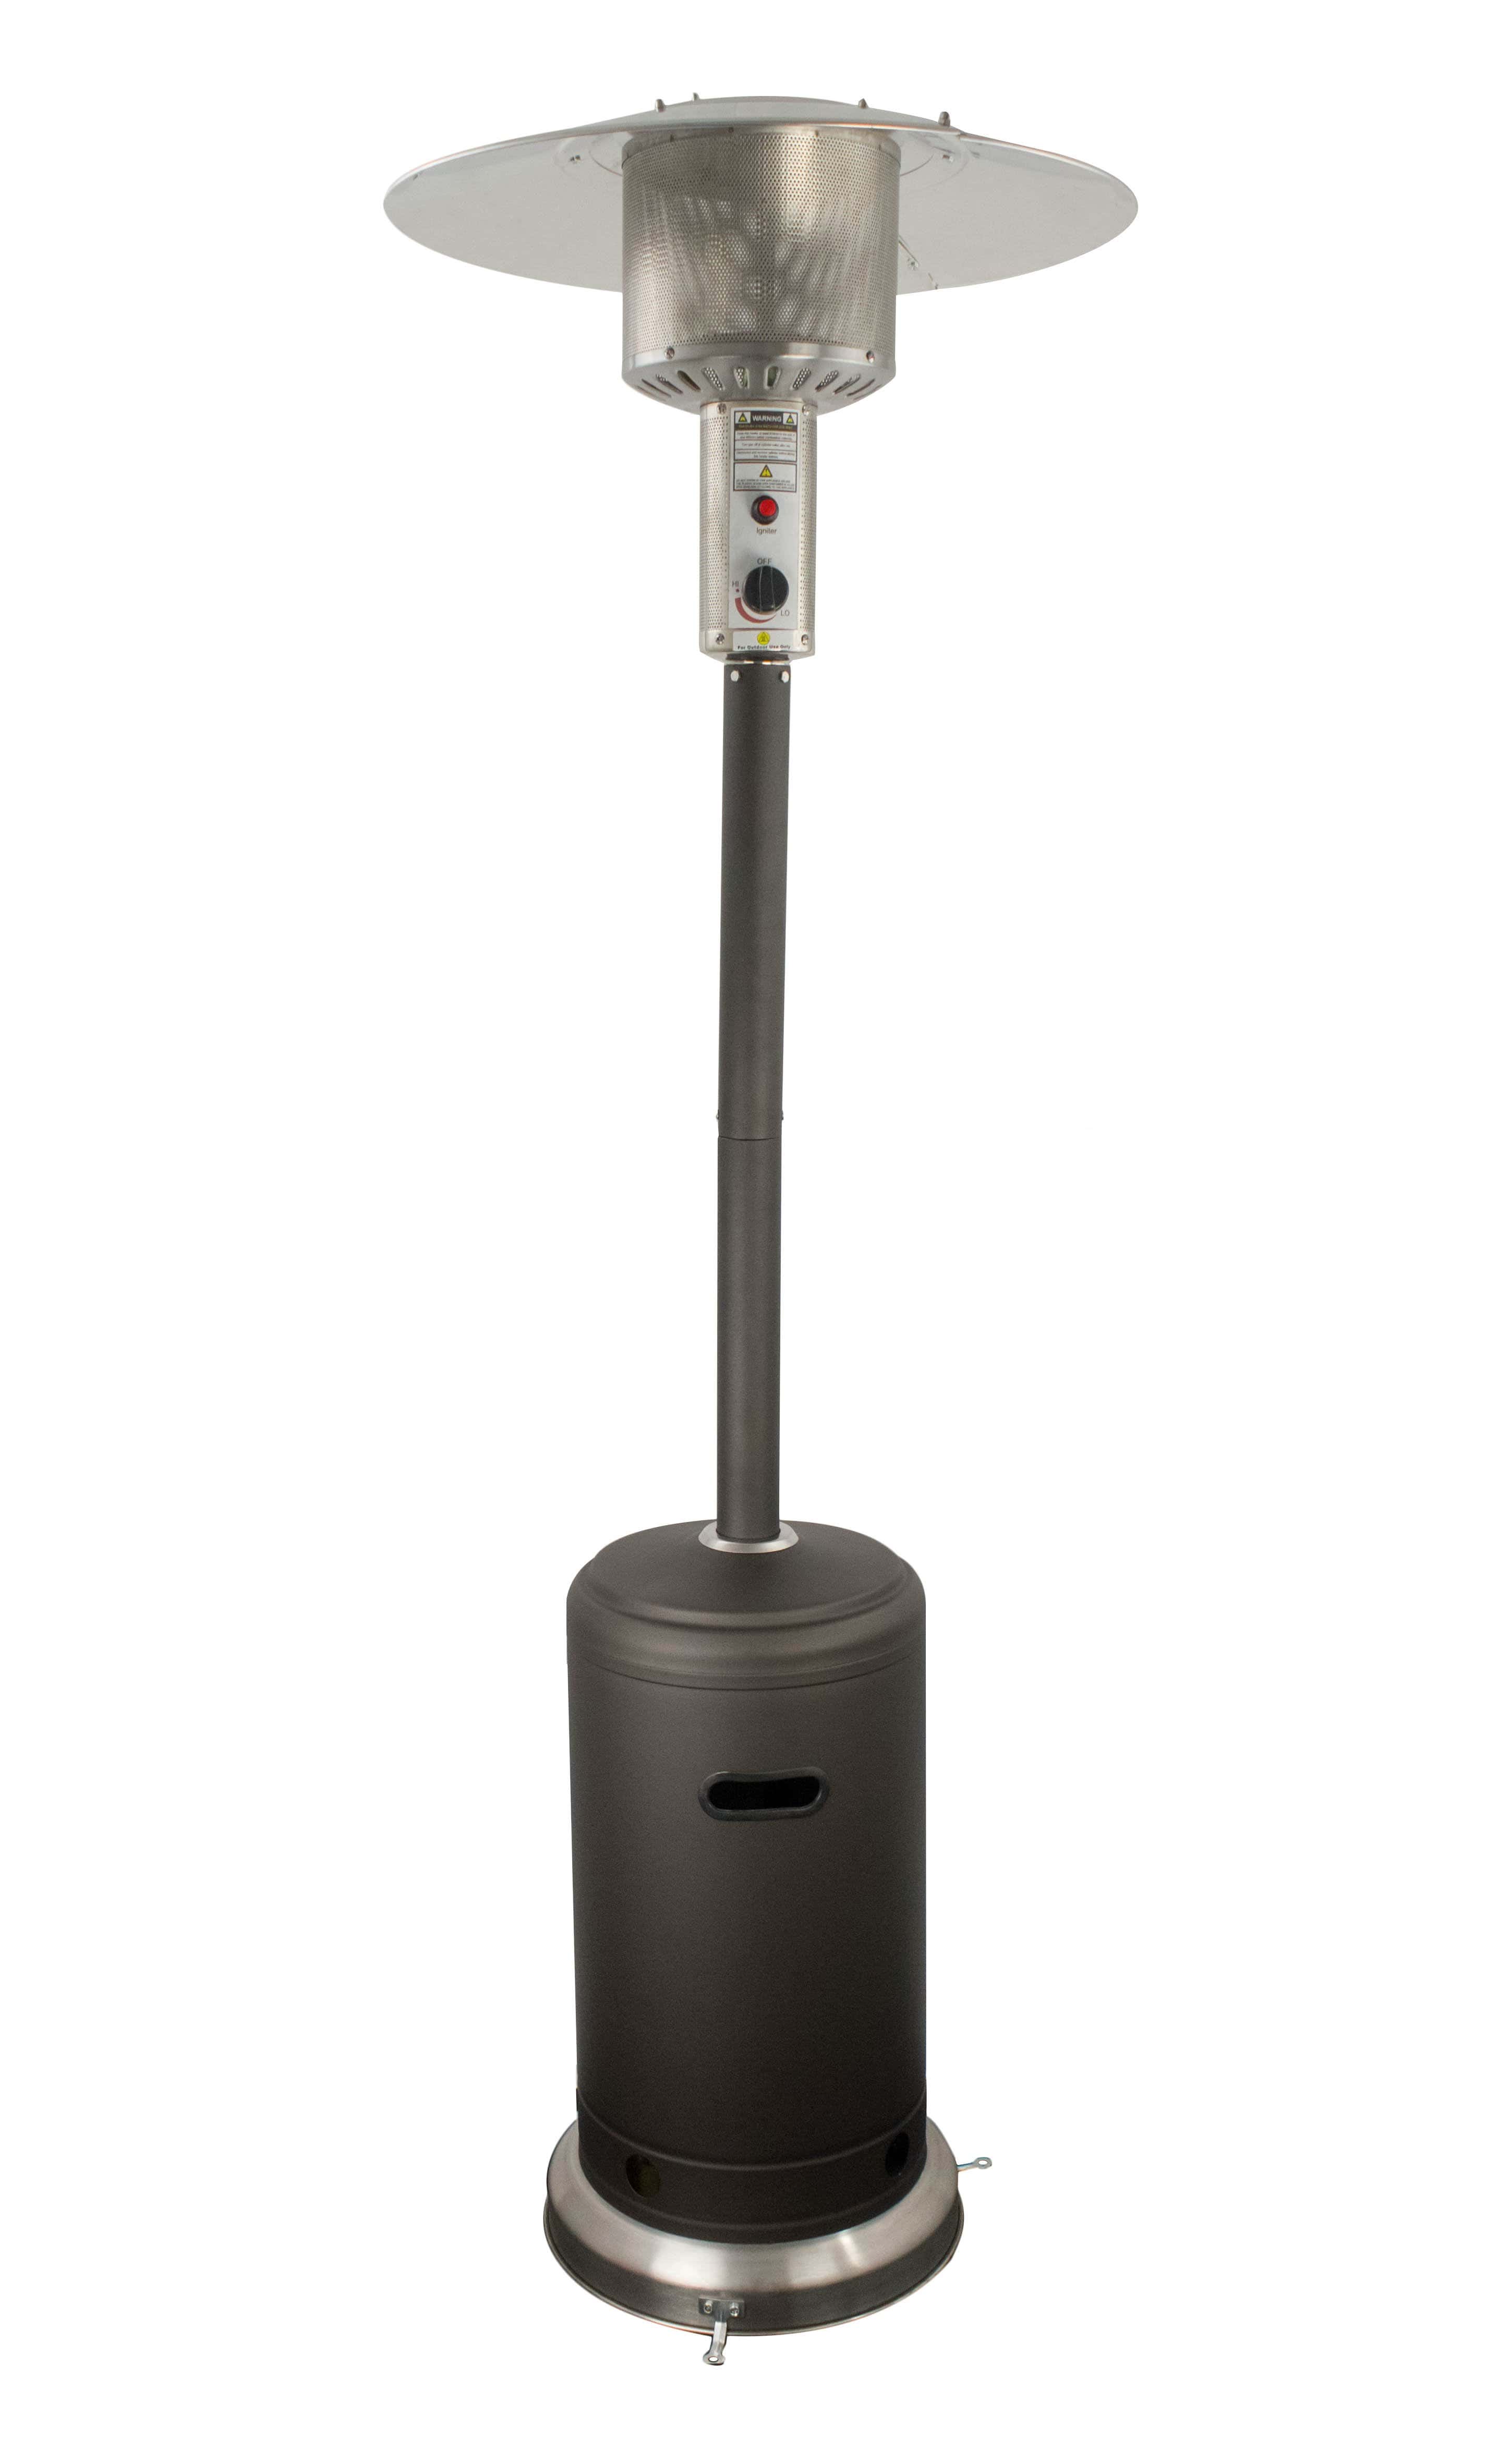 Hiland Patio Heaters TALL PROMO MOCHA AND STAINLESS HEATER-40000 BTU'S